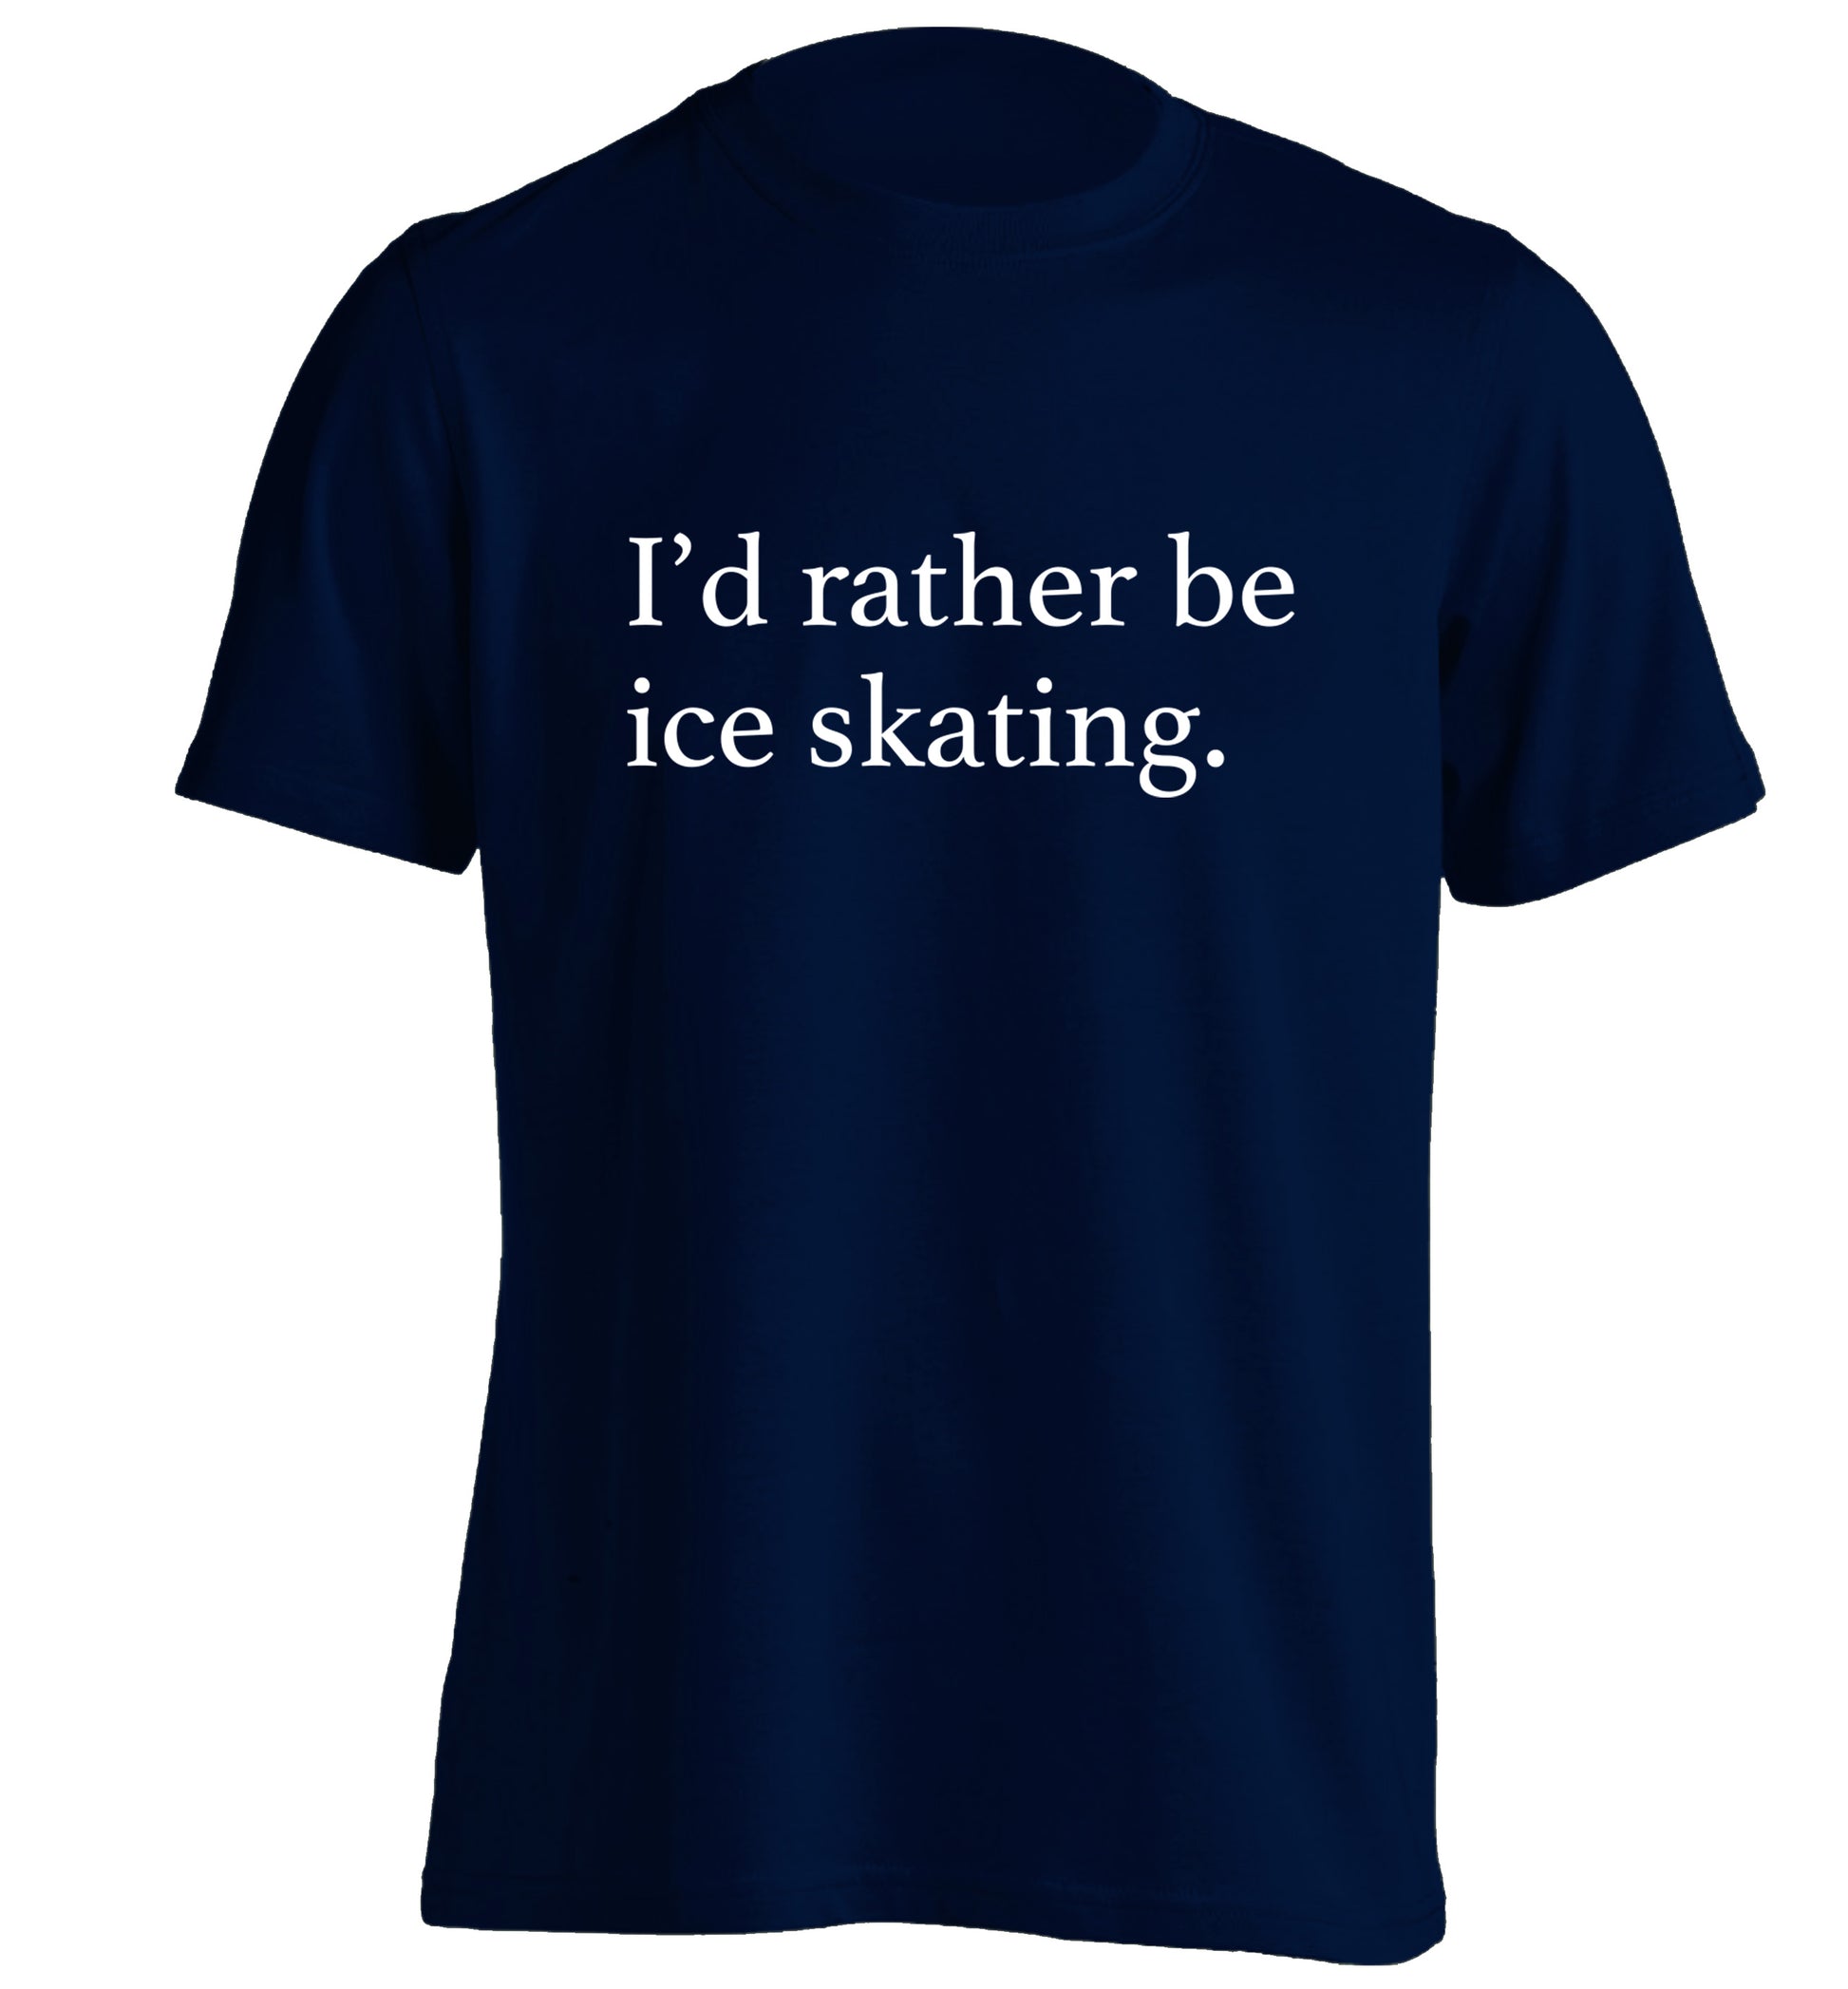 I'd rather be ice skating adults unisexnavy Tshirt 2XL